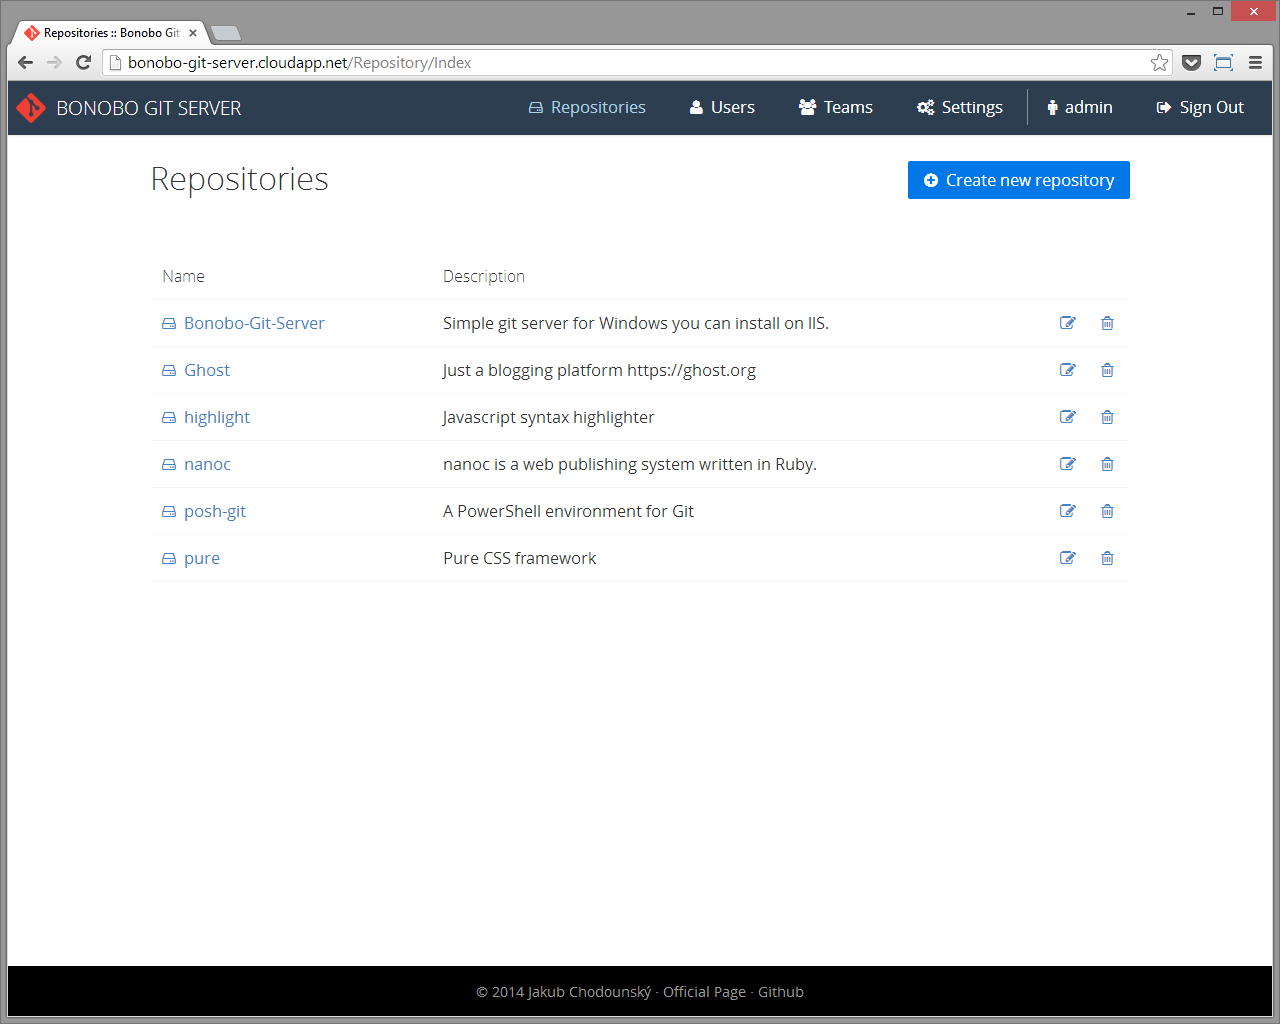 Repository Management